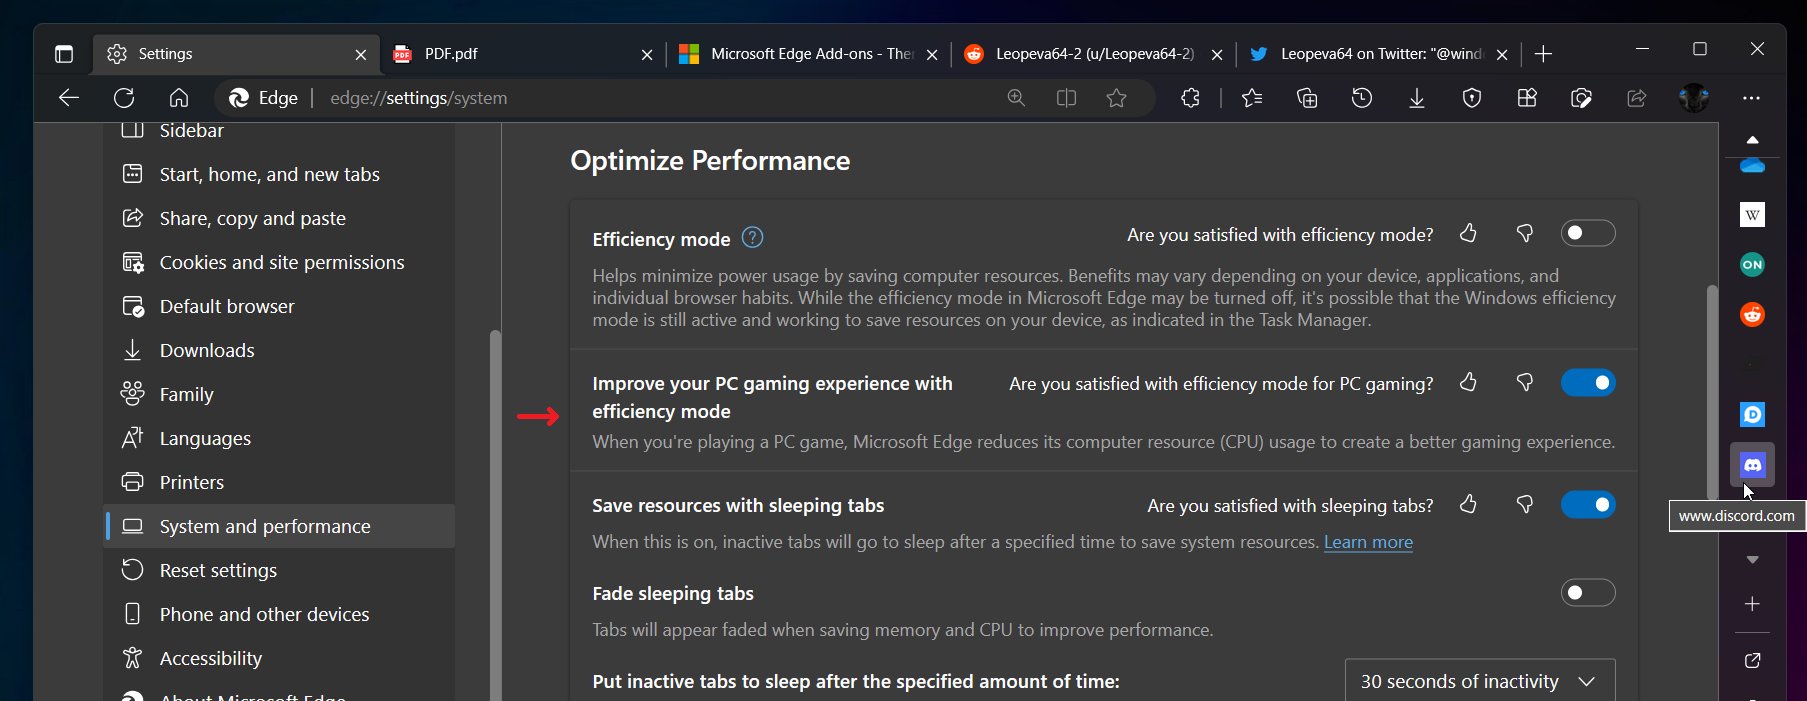 Gaming Efficiency Mode on Edge for Windows PC